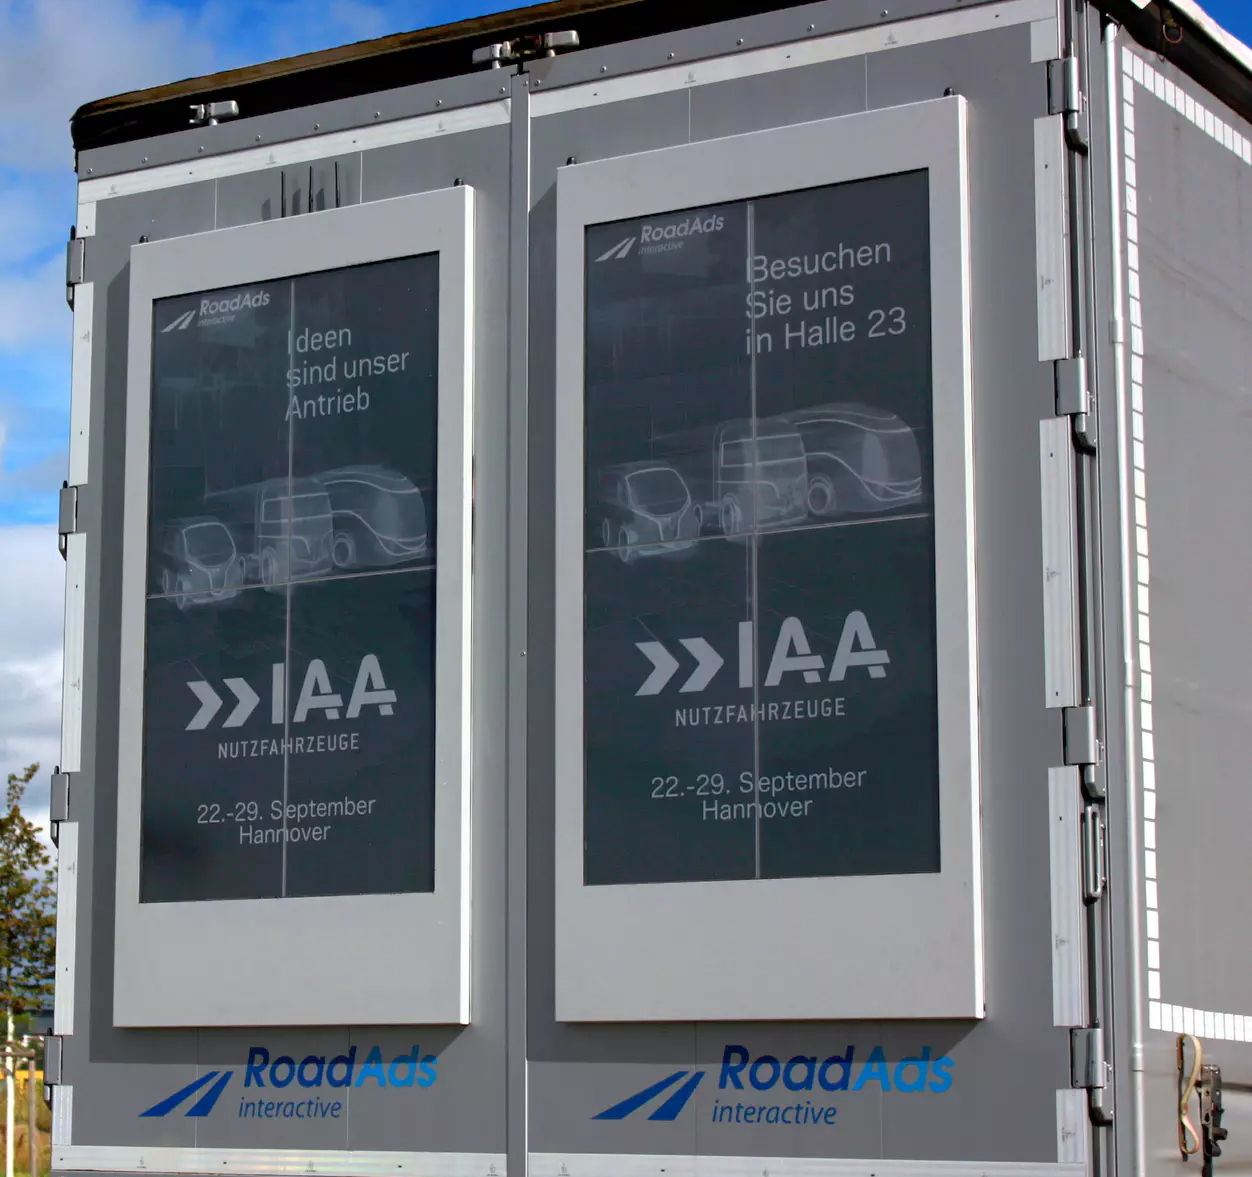 Is the Future of Advertising Going to Be E Ink Displays on the Back of Big Rigs?